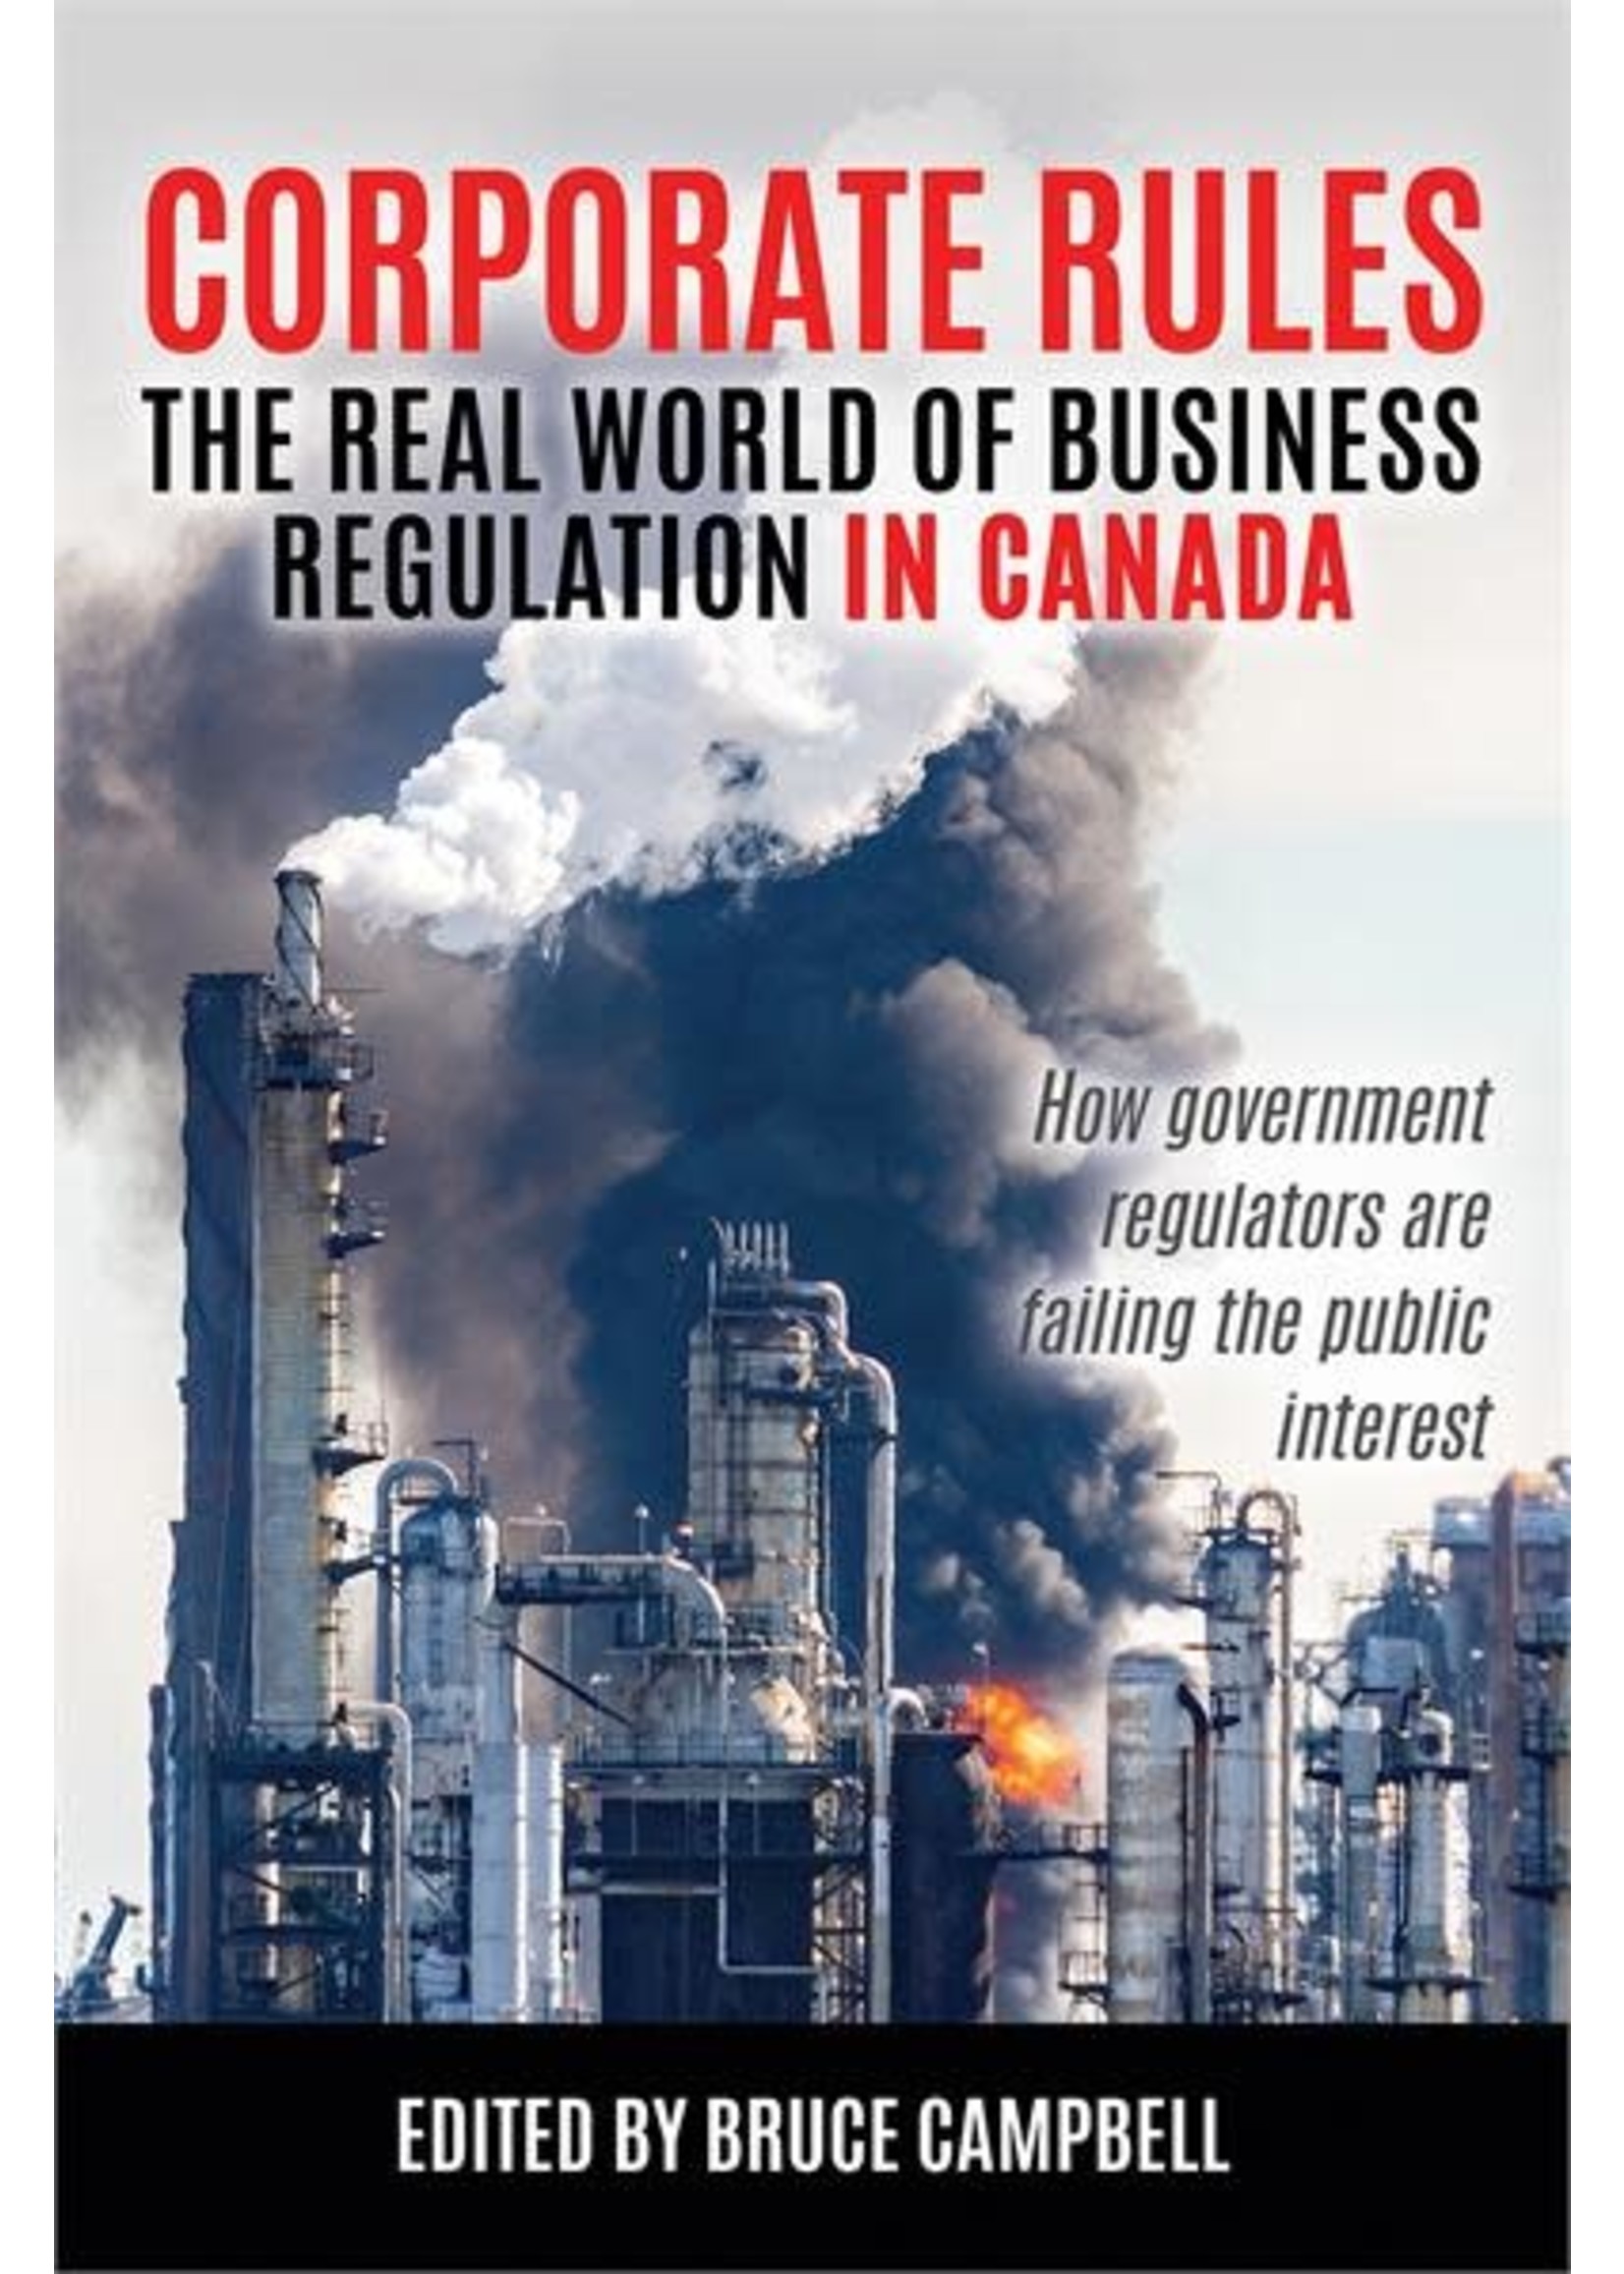 Corporate Rules: The Real World of Business Regulation in Canada by Bruce Campbell